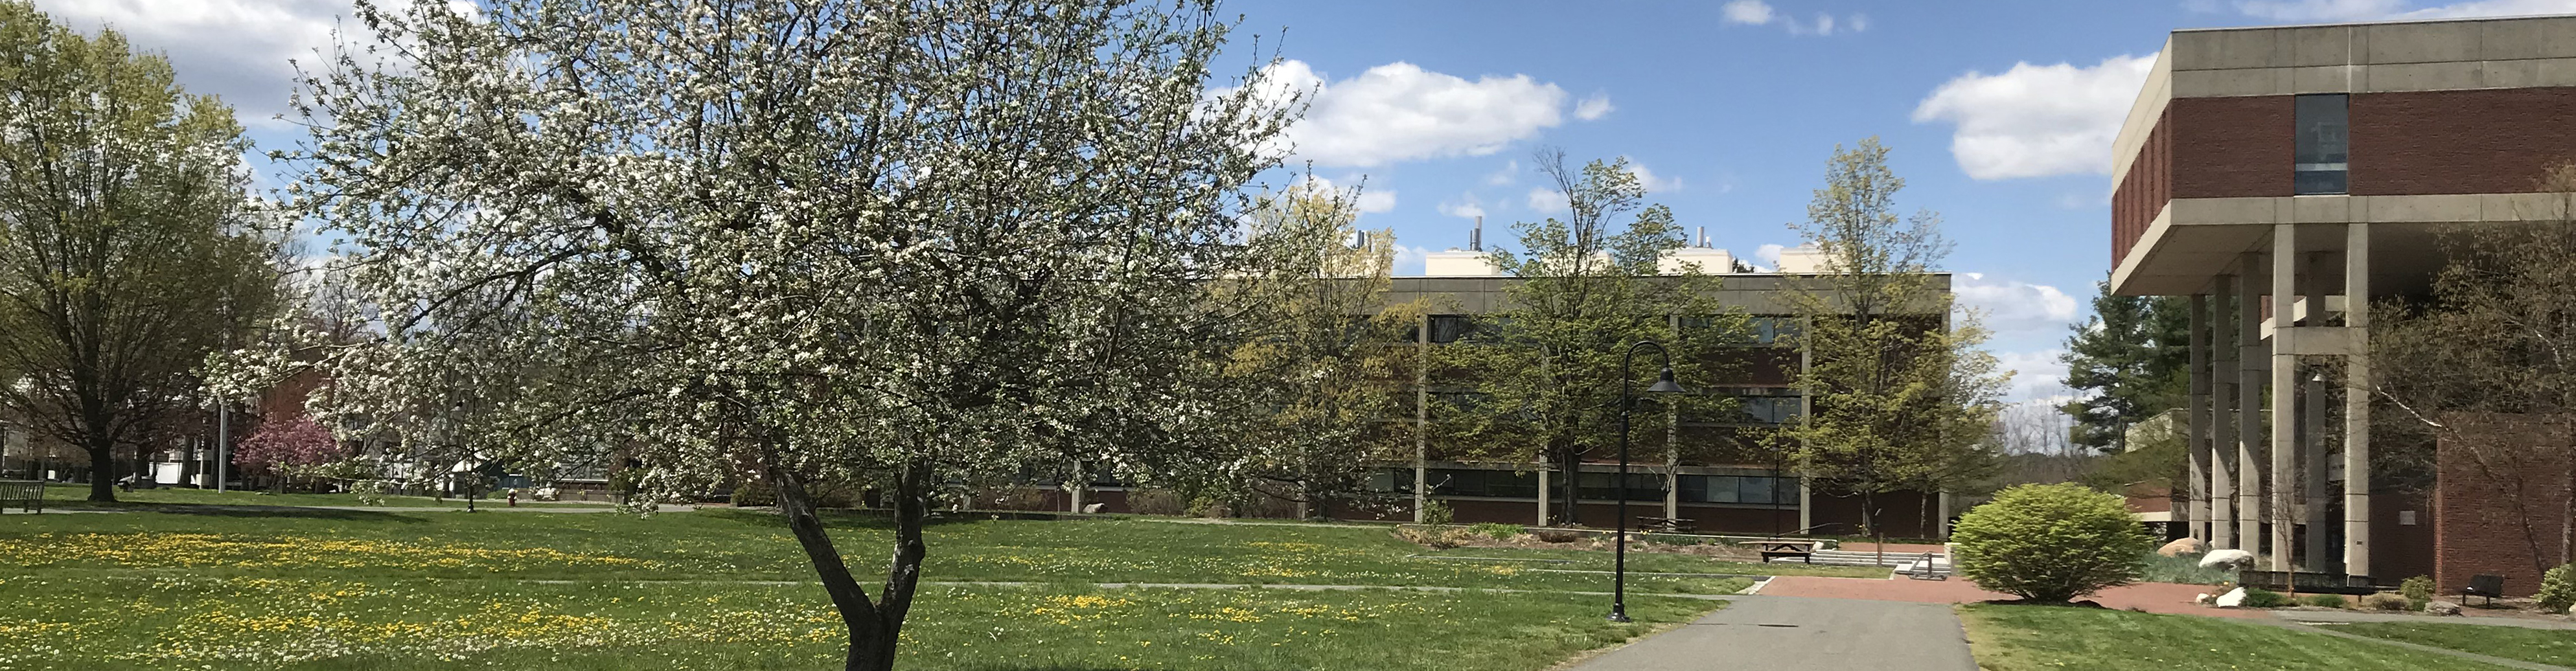 the center of campus, as seen in spring, with blue sky and green grass